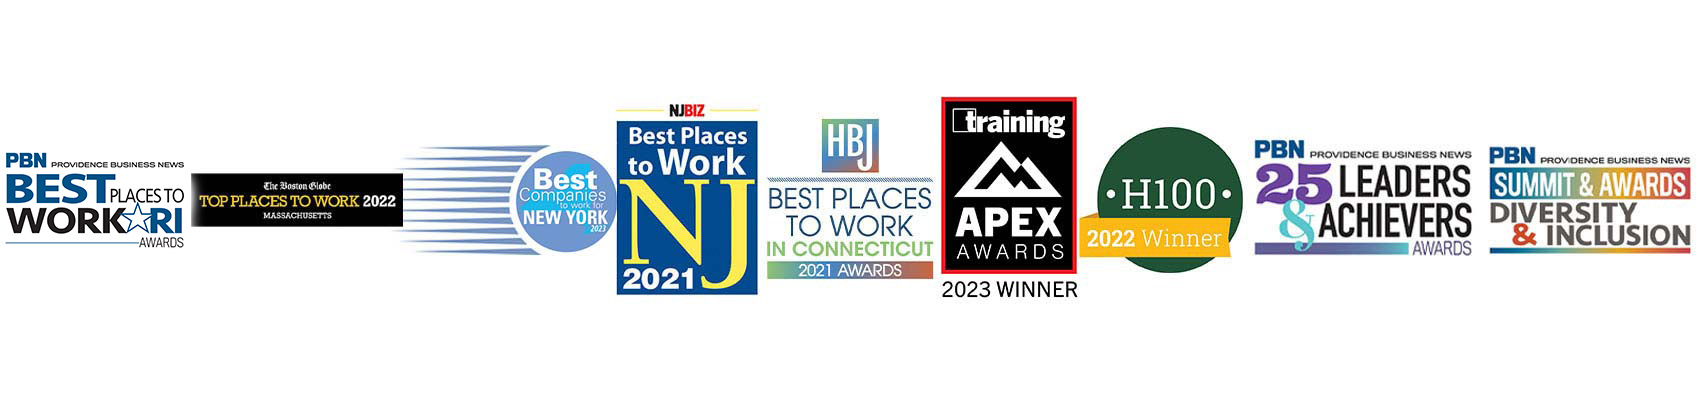 Providence Business News Best Places to Work RI Awards; Boston Globe Top Places to Work 2022; Best Companies New York 2023; NJBiz Best Places to Work 2021; HBJ Best Places to Work in Connecticut 2021; APEX Awards 2023 Winner; H100 2022 Winner; PBN 25 Leaders and Achievers Awards; PBN Diversity and Inclusion Awards